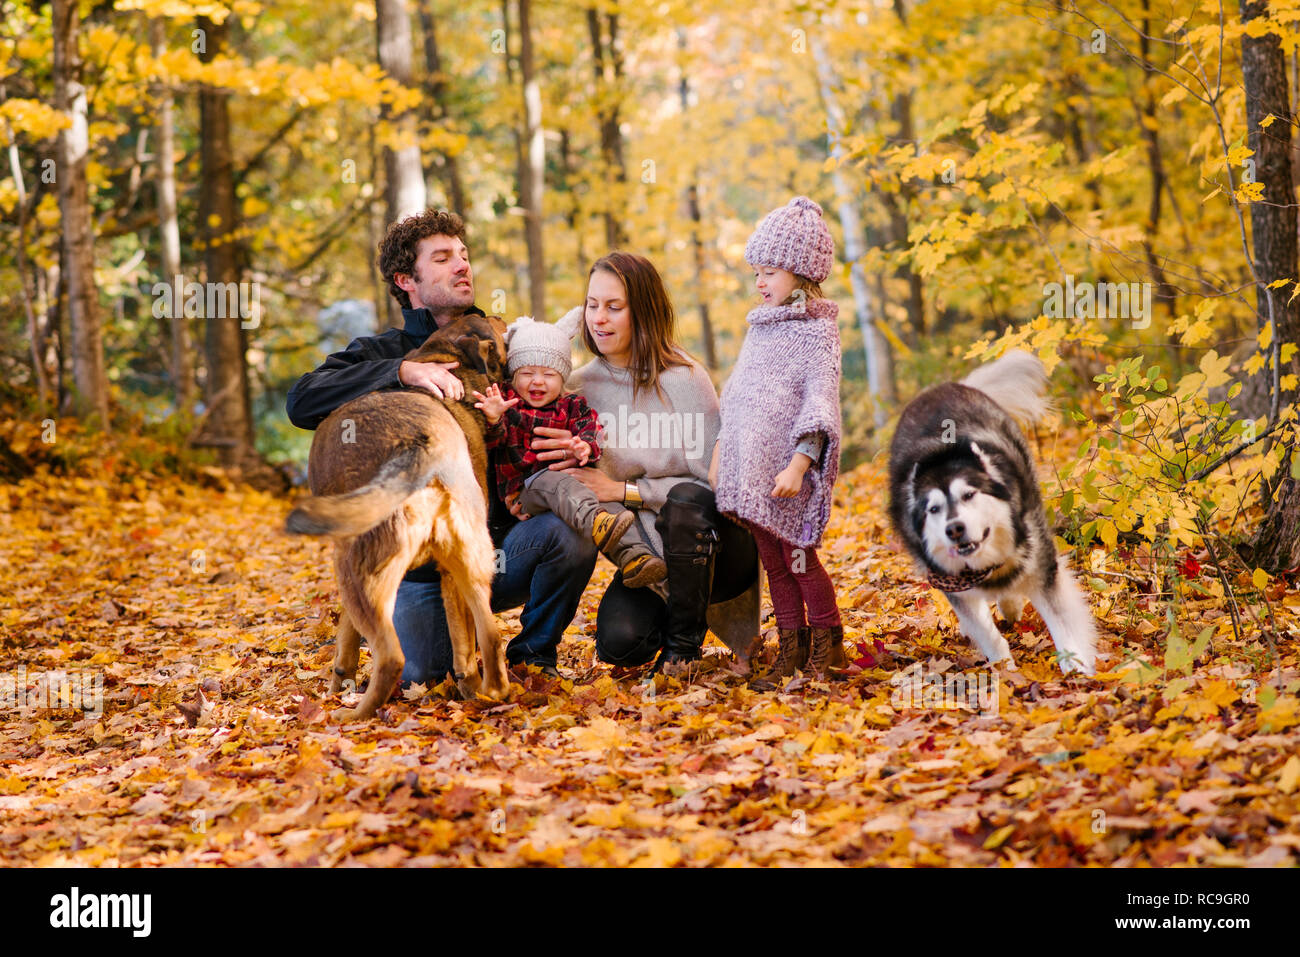 Family of four and dogs in forest Stock Photo